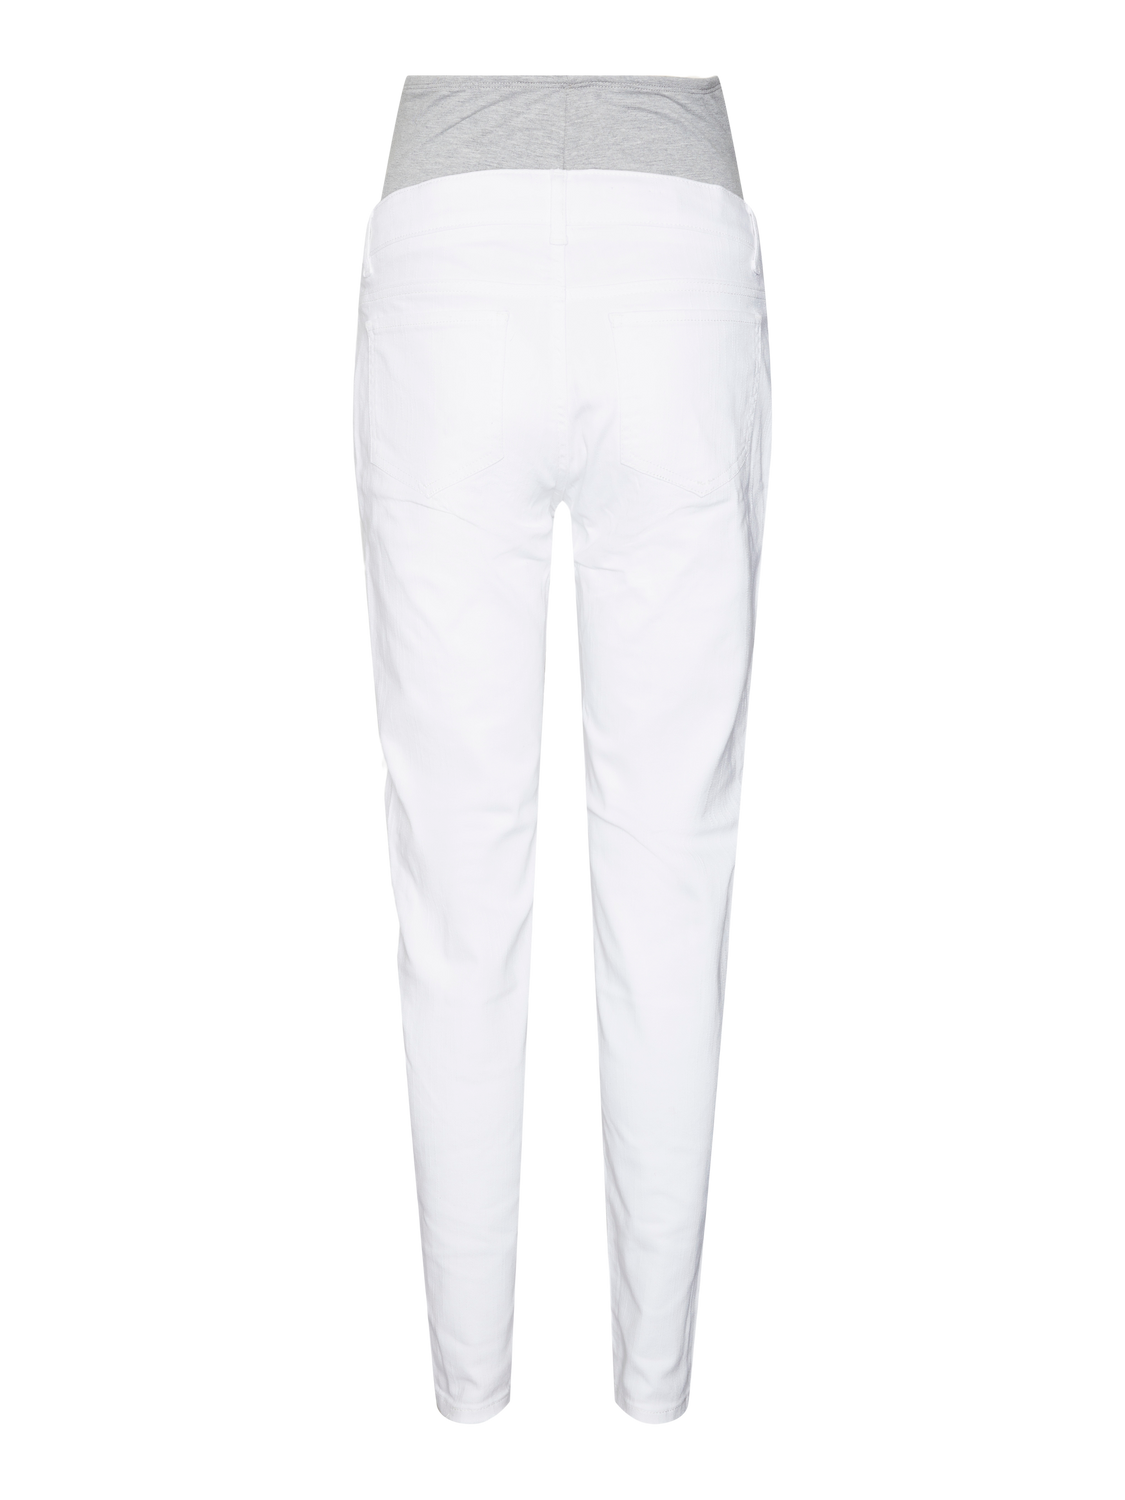 MAMA.LICIOUS Slim Fit Middels høy midje Jeans -Antique White - 20020025